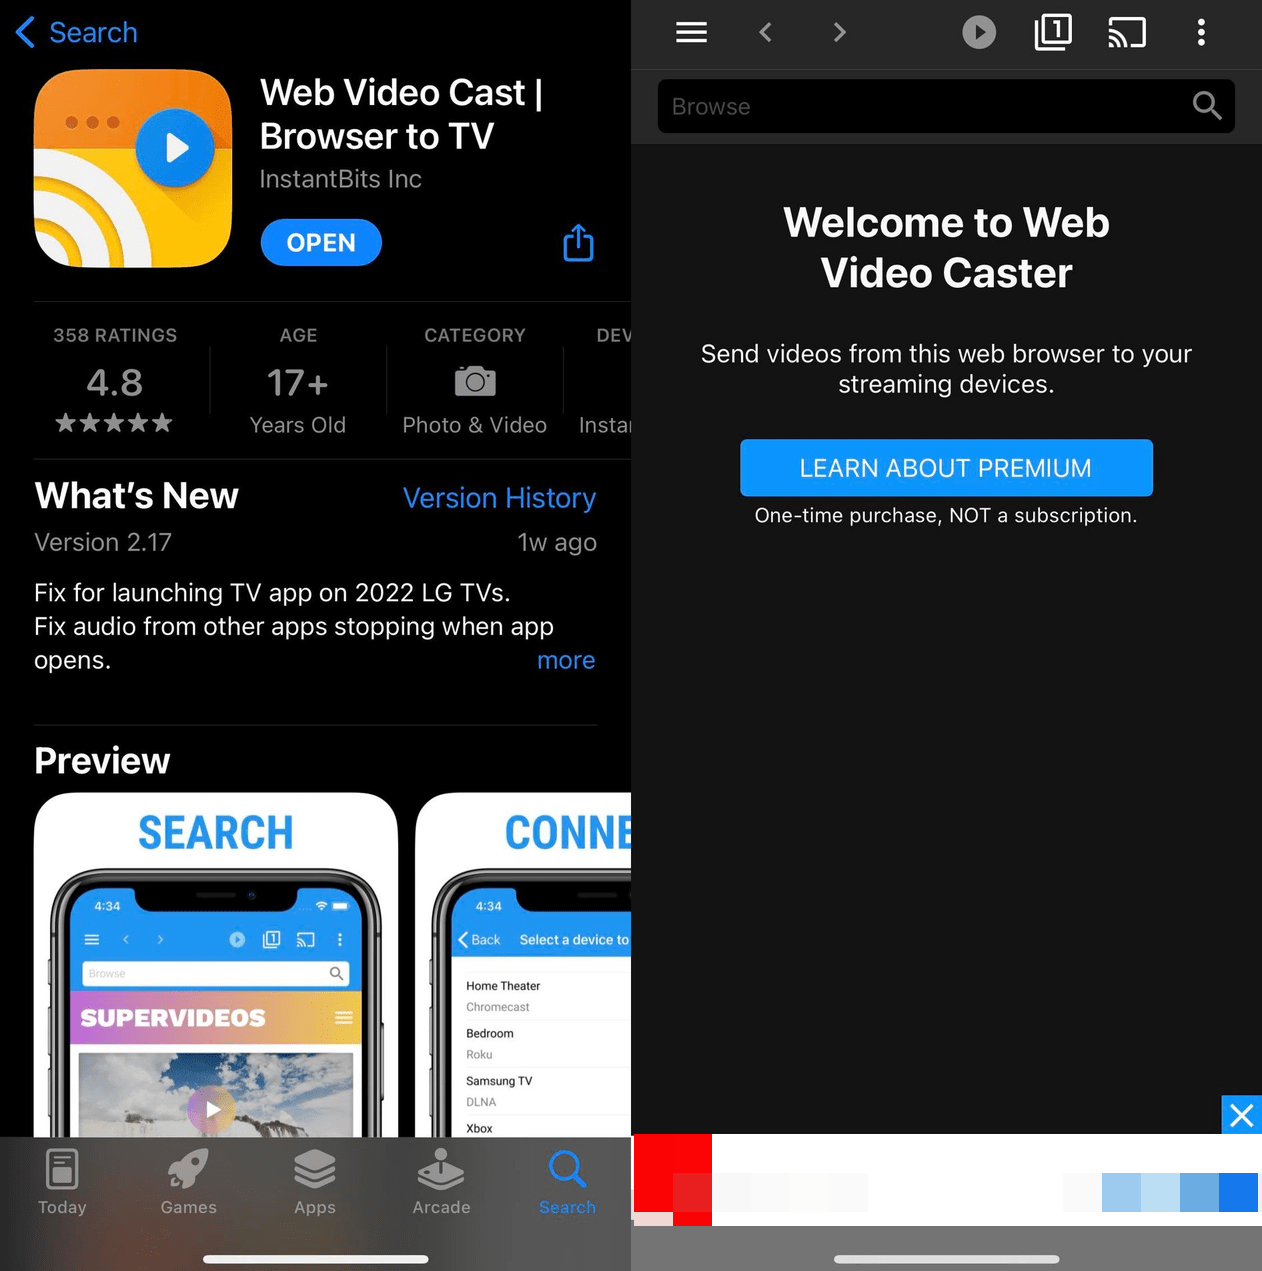 A combined picture, with Web Video Cast on the App Store on the left, and the homepage of Web Video Cast on the right.